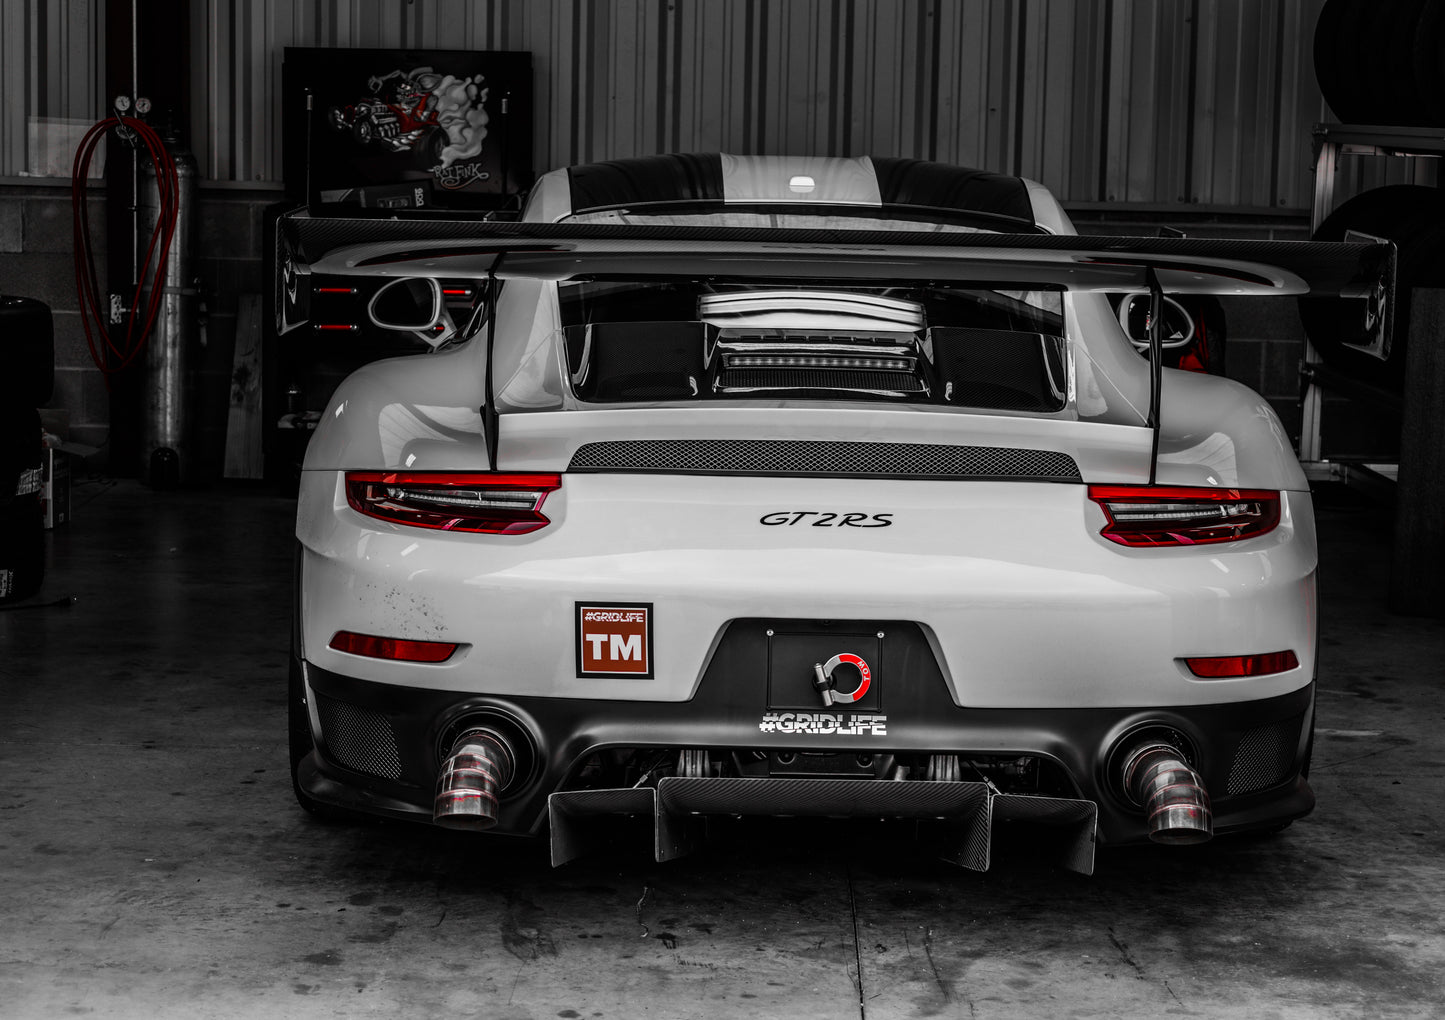 GT2RS Photography Print Home Decor